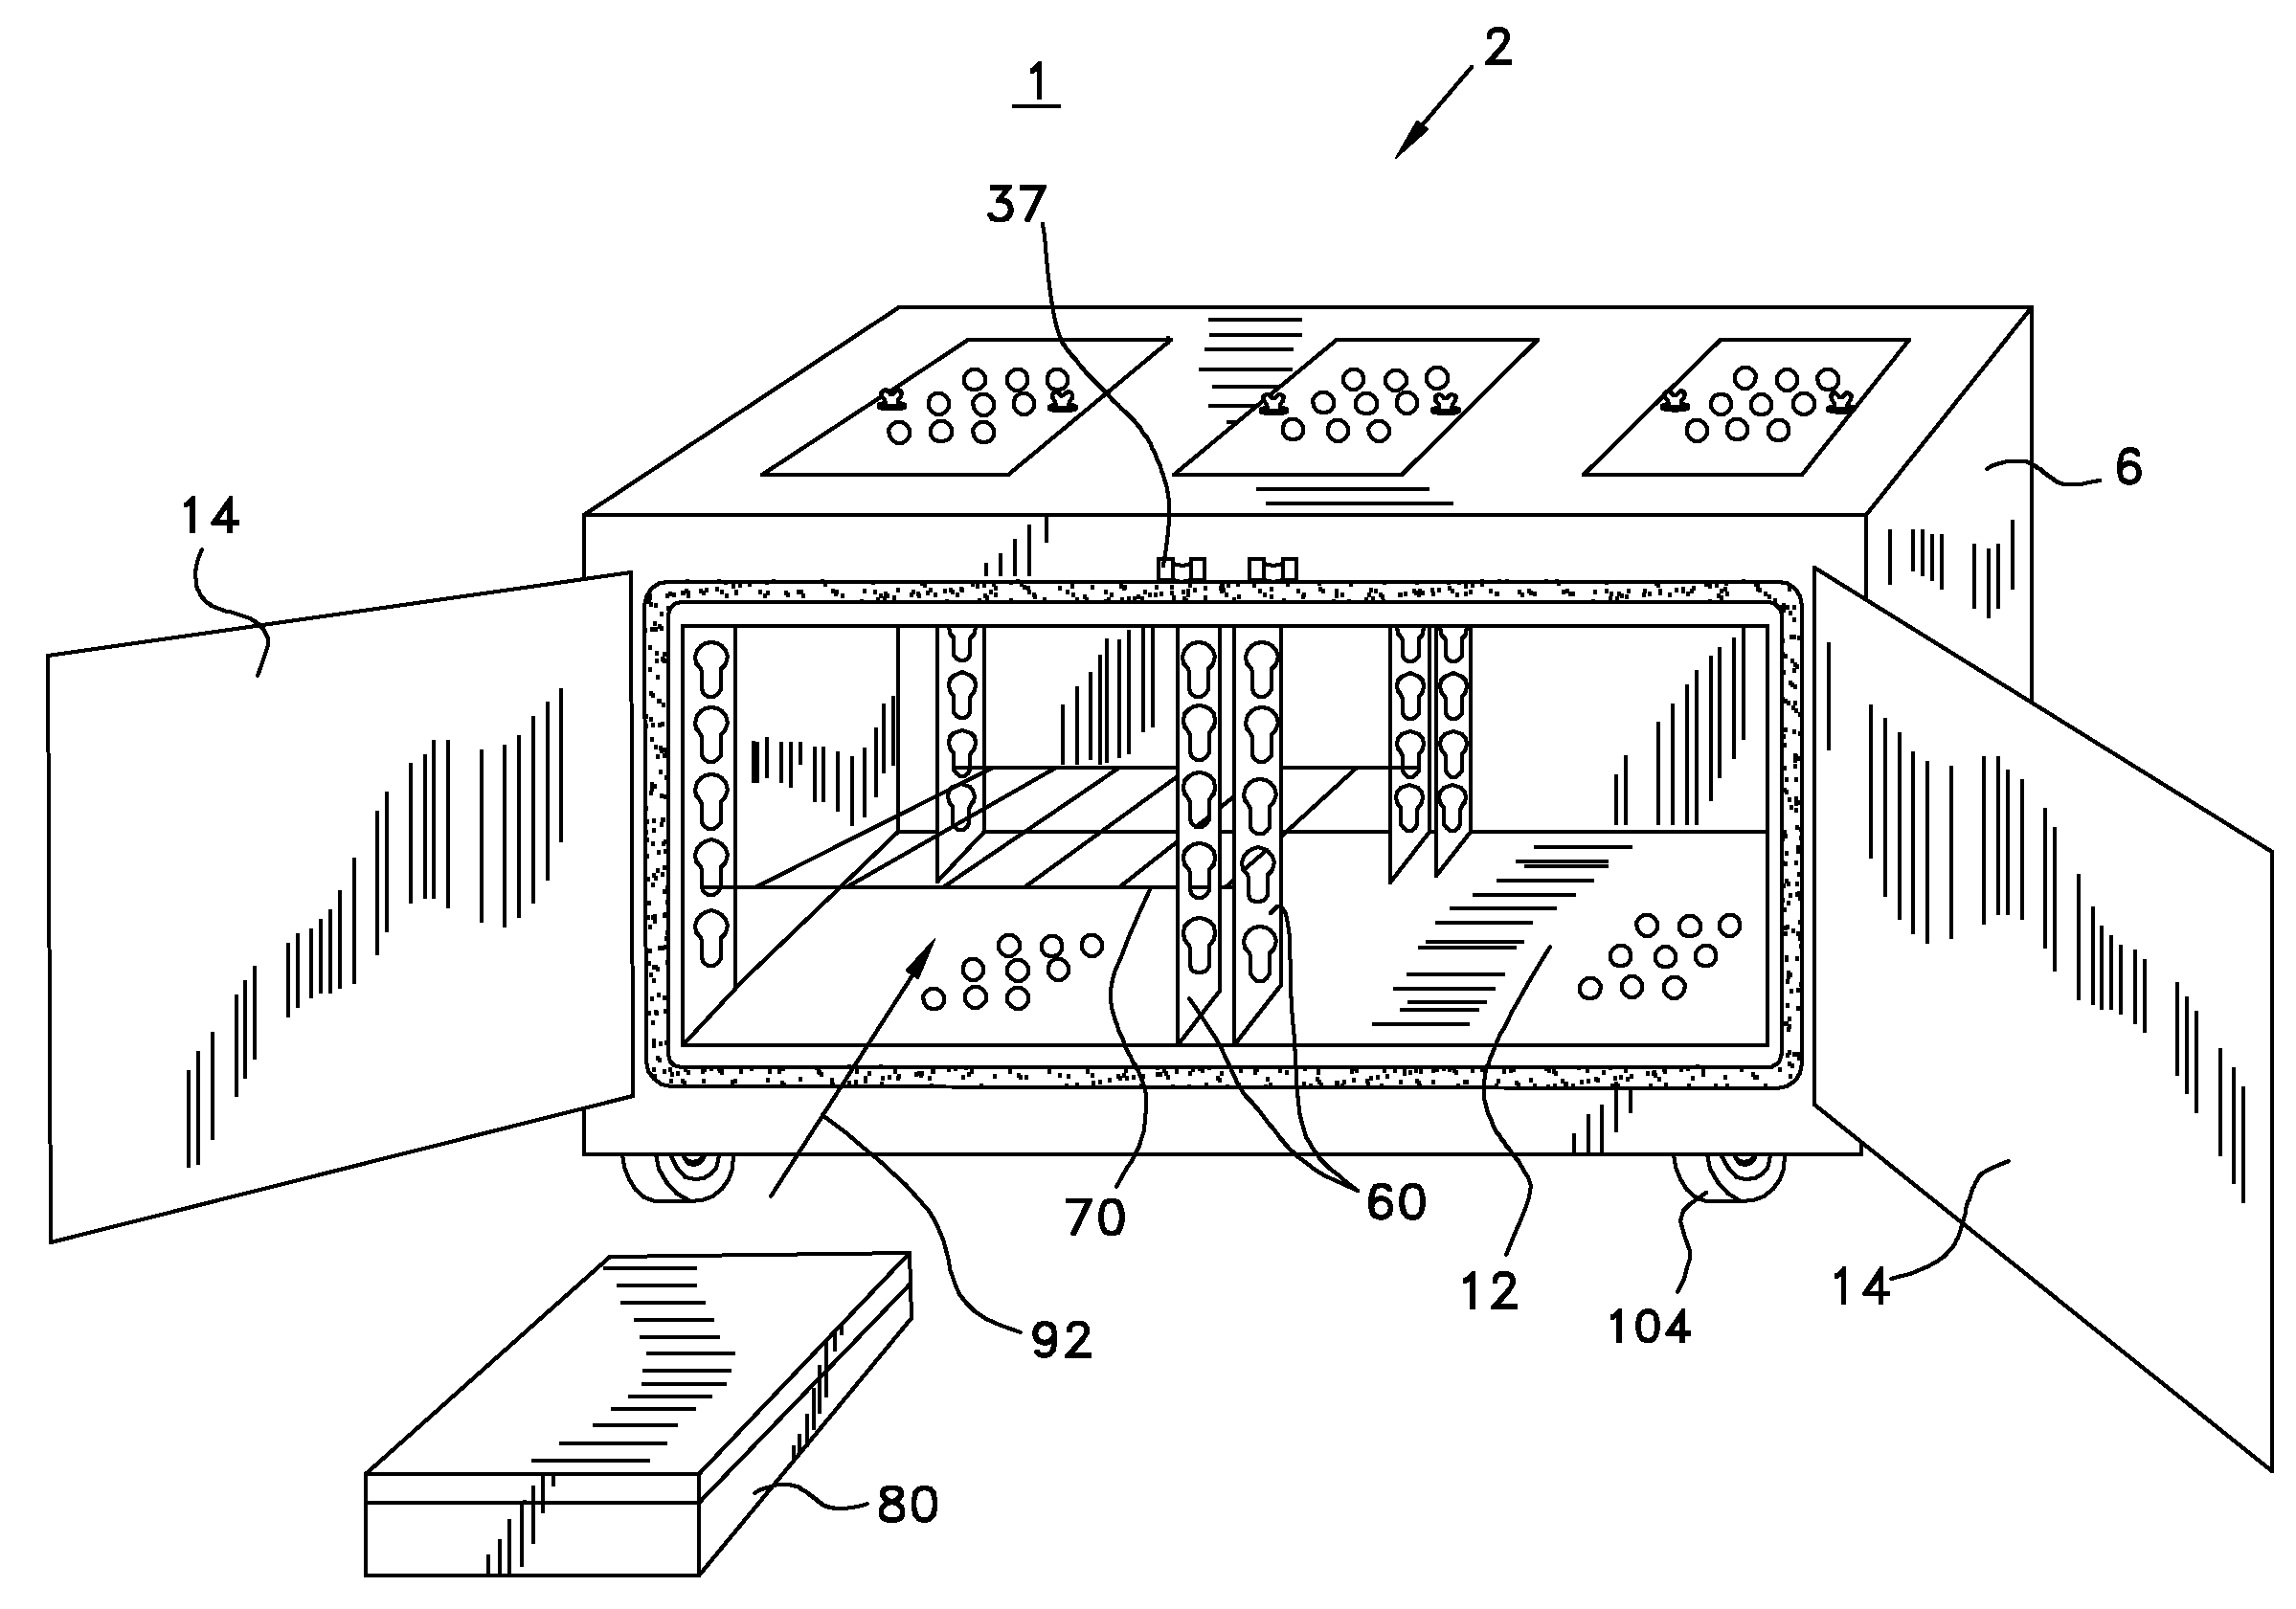 Mobile apparatus and method to sterilize surgical trays